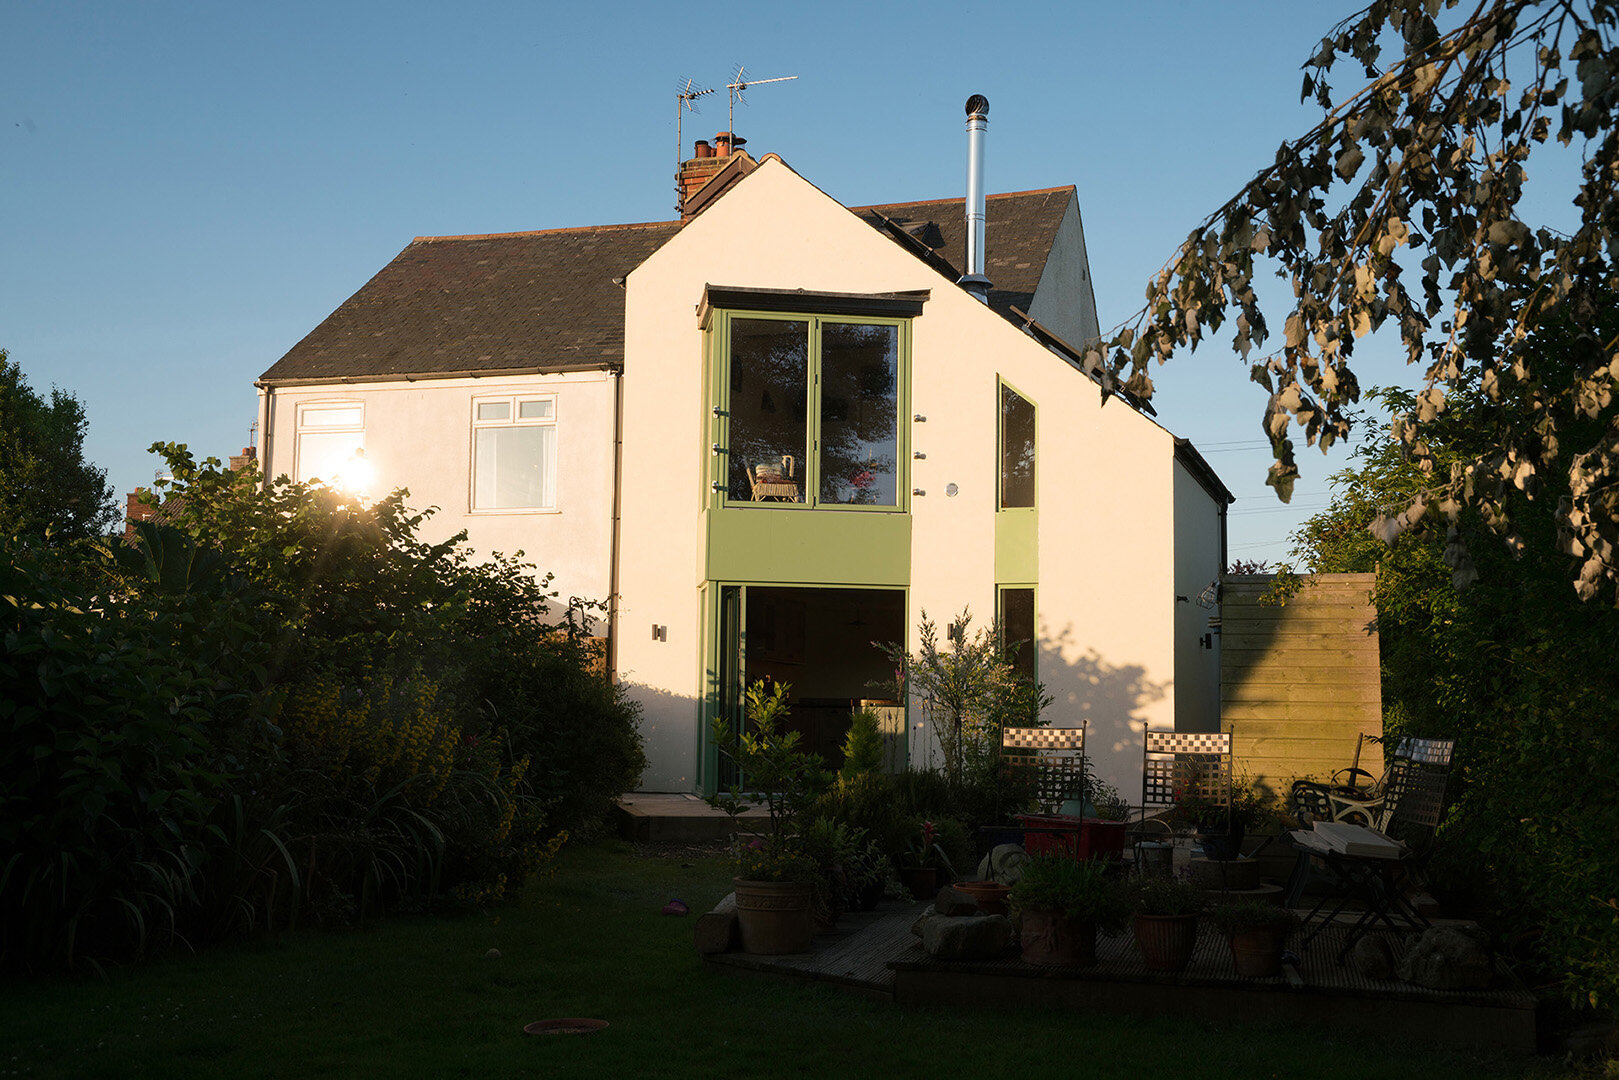 Eco-Friendly Extensions - Sustainable Architects in Driffield - Samuel Kendall Associates.jpg